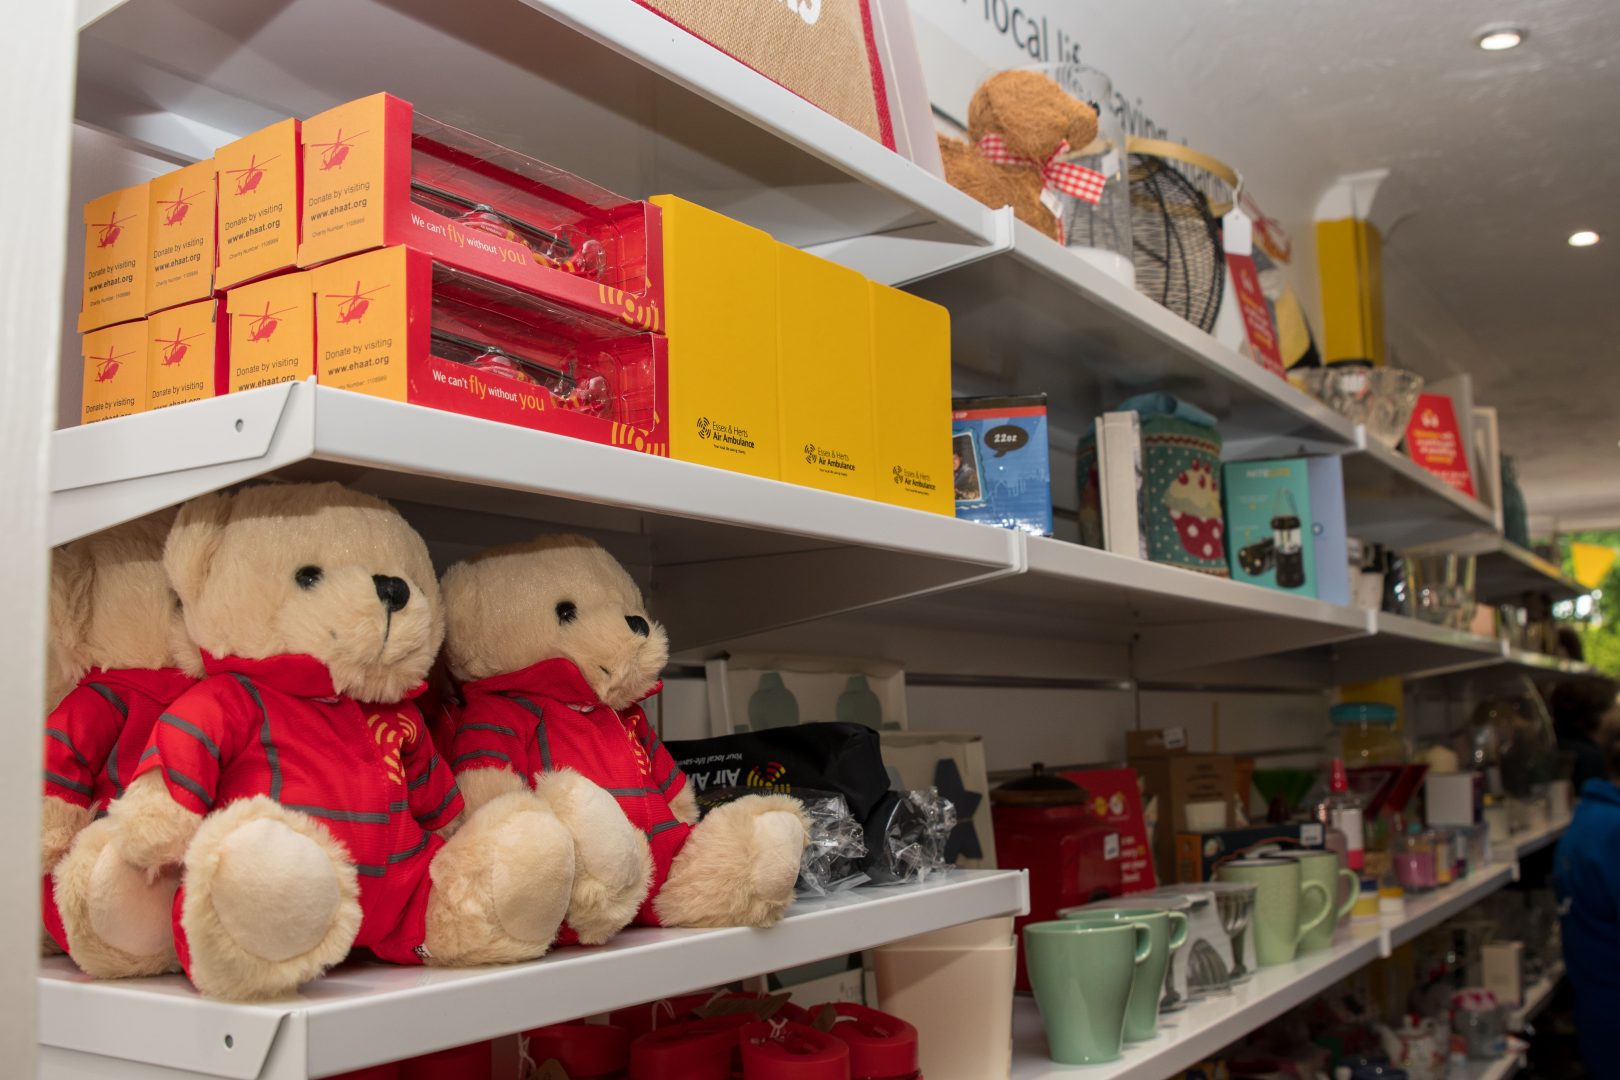 Essex & Herts Air Ambulance opens new Charity Shop in Stevenage